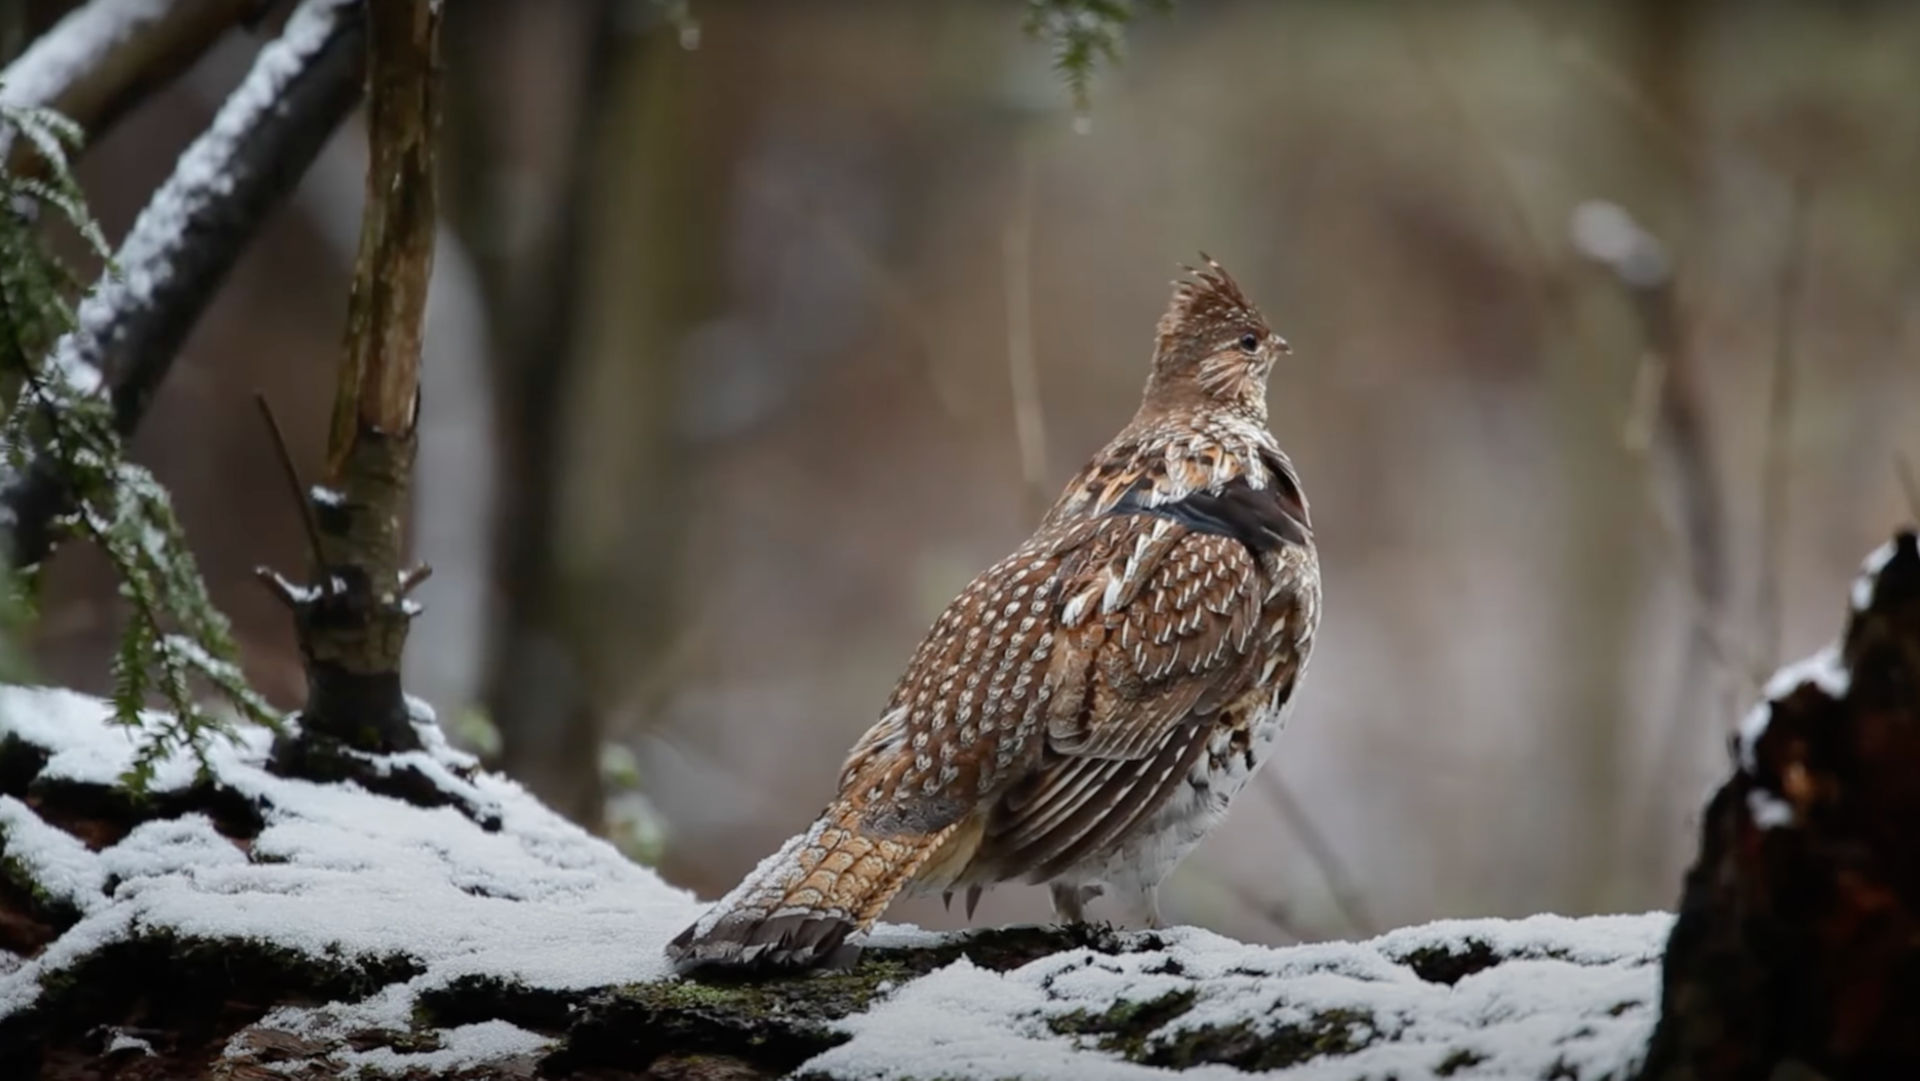 A ruffed Grouse flapping its wings outside in the rain